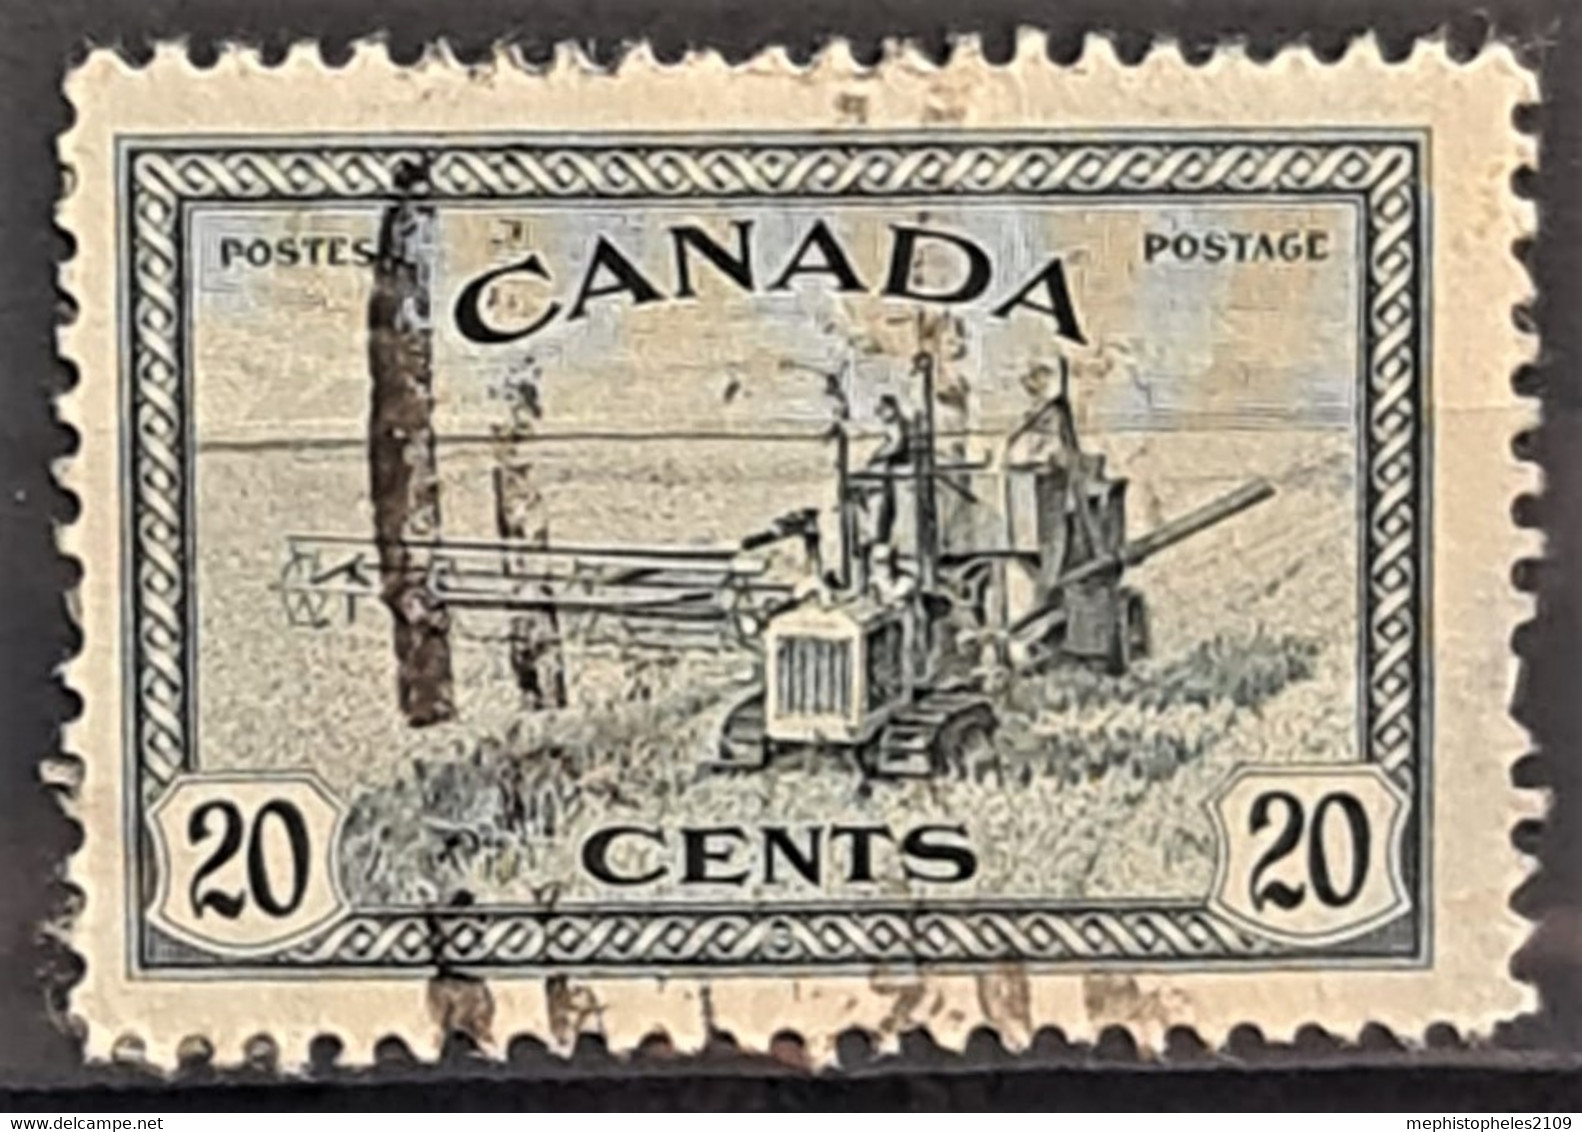 CANADA 1946 - Canceled - Sc# 271 - 20c - Used Stamps